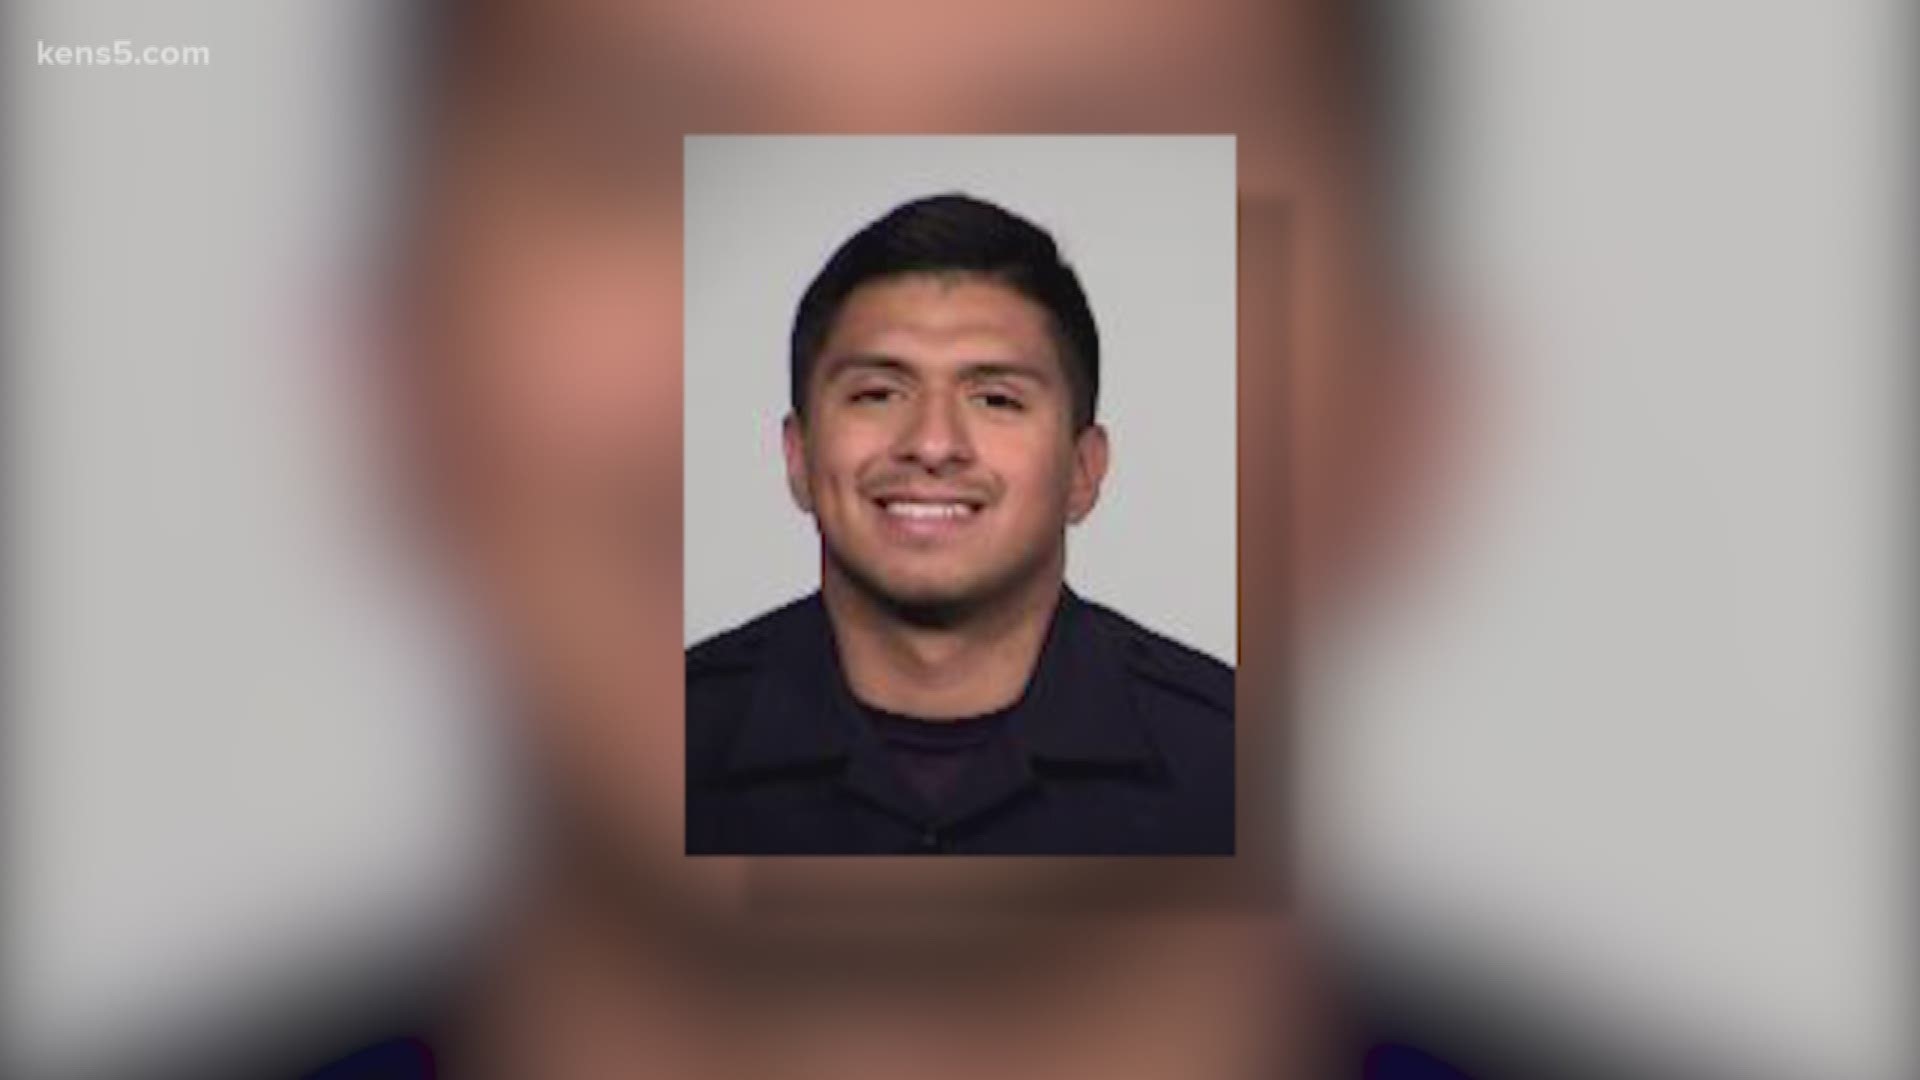 The 23-year-old officer has been placed on leave, and is being charged with assault family violence.